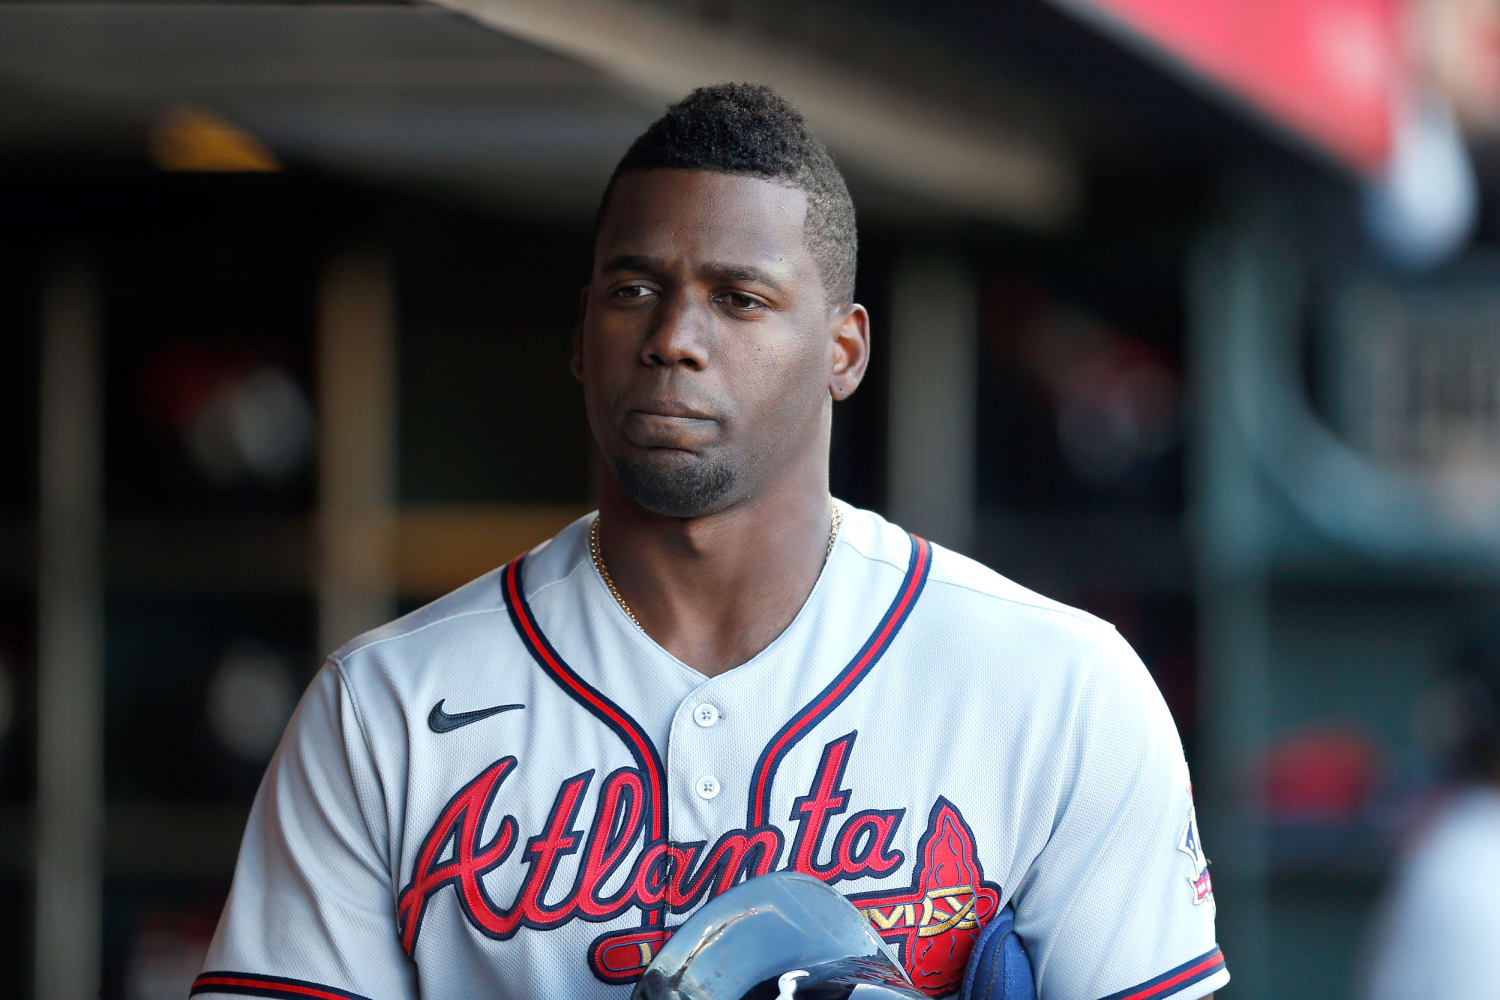 ATL Braves, World Series MVP Sued After Ball Hits Fan's Eye